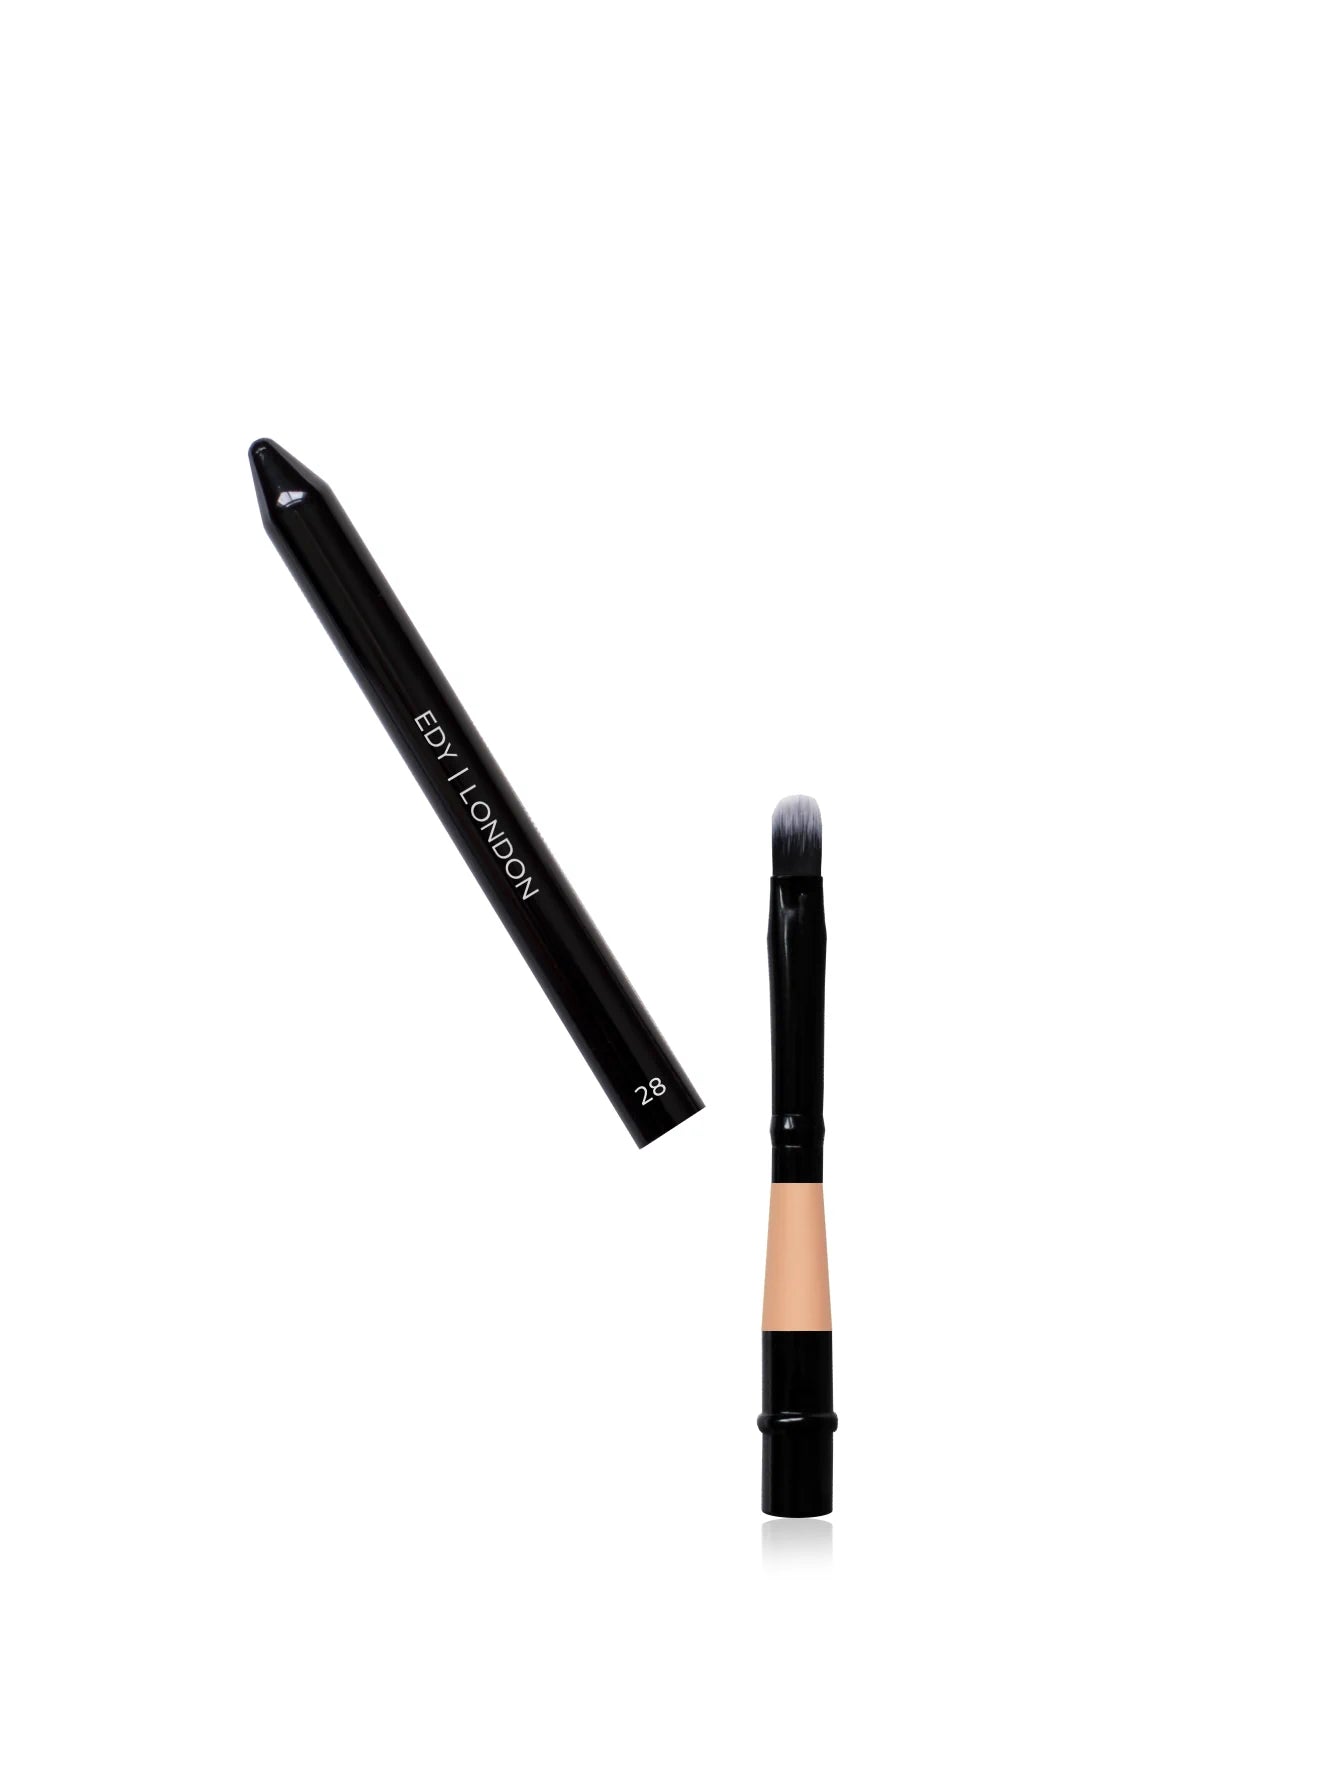 Lip Brush with Cover 28 Make-up Brush EDY LONDON Pale Pink   - EDY LONDON PRODUCTS UK - The Best Makeup Brushes - shop.edy.london